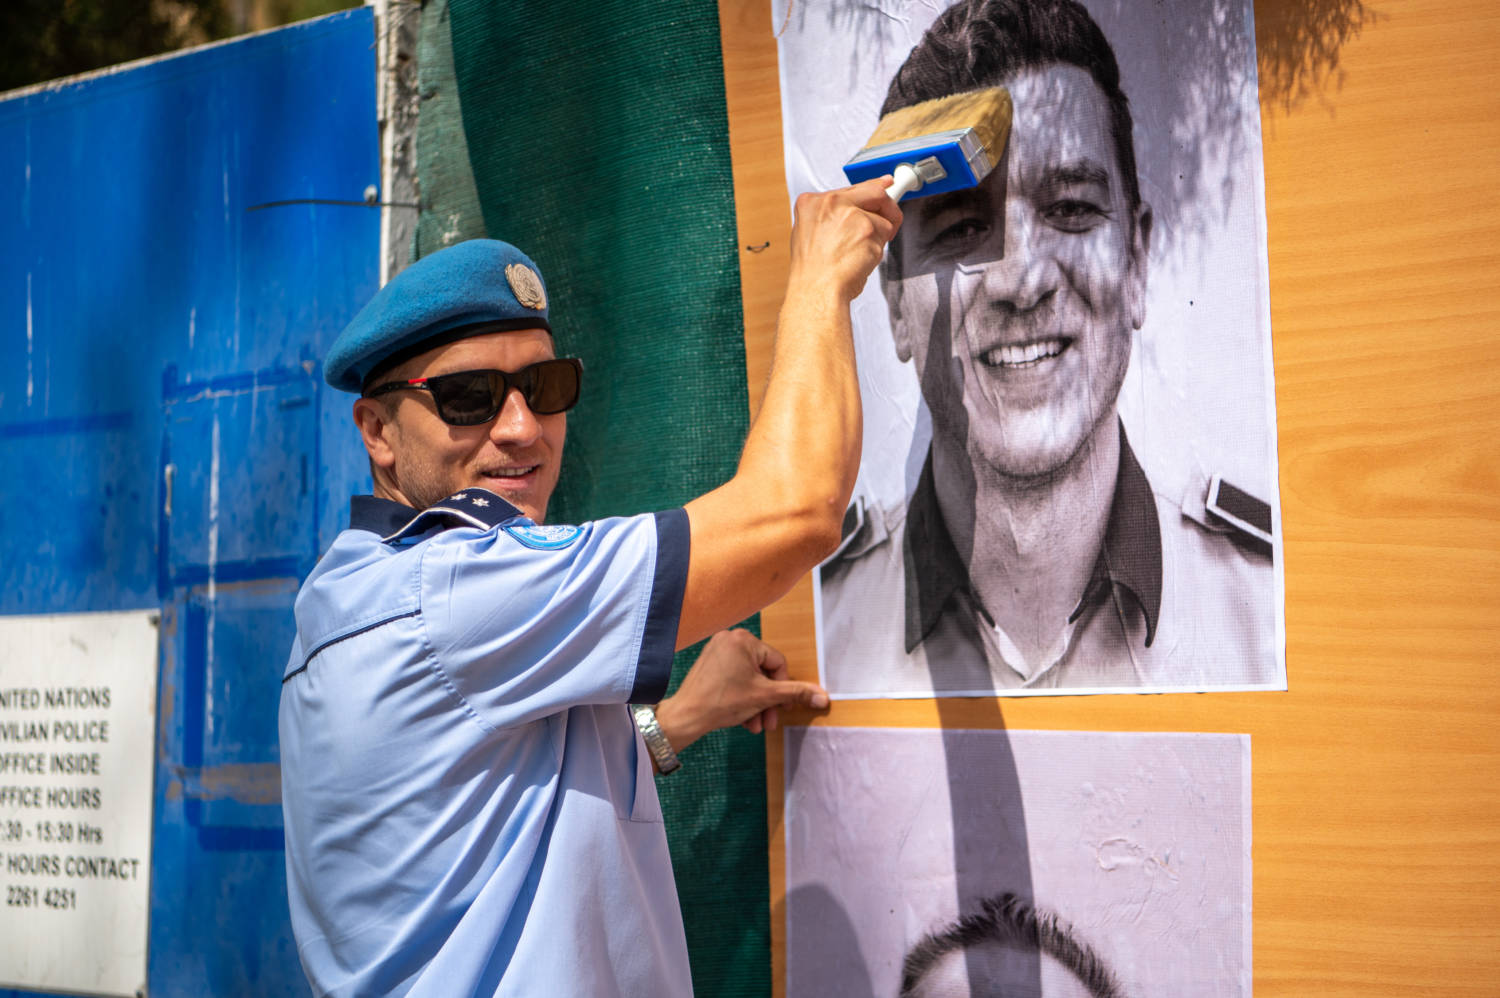 Unficyp Launched The Inside Out Project With Peacekeepers And Peace Makers Placing Their Portraits In Nicosia Marking The 75th An